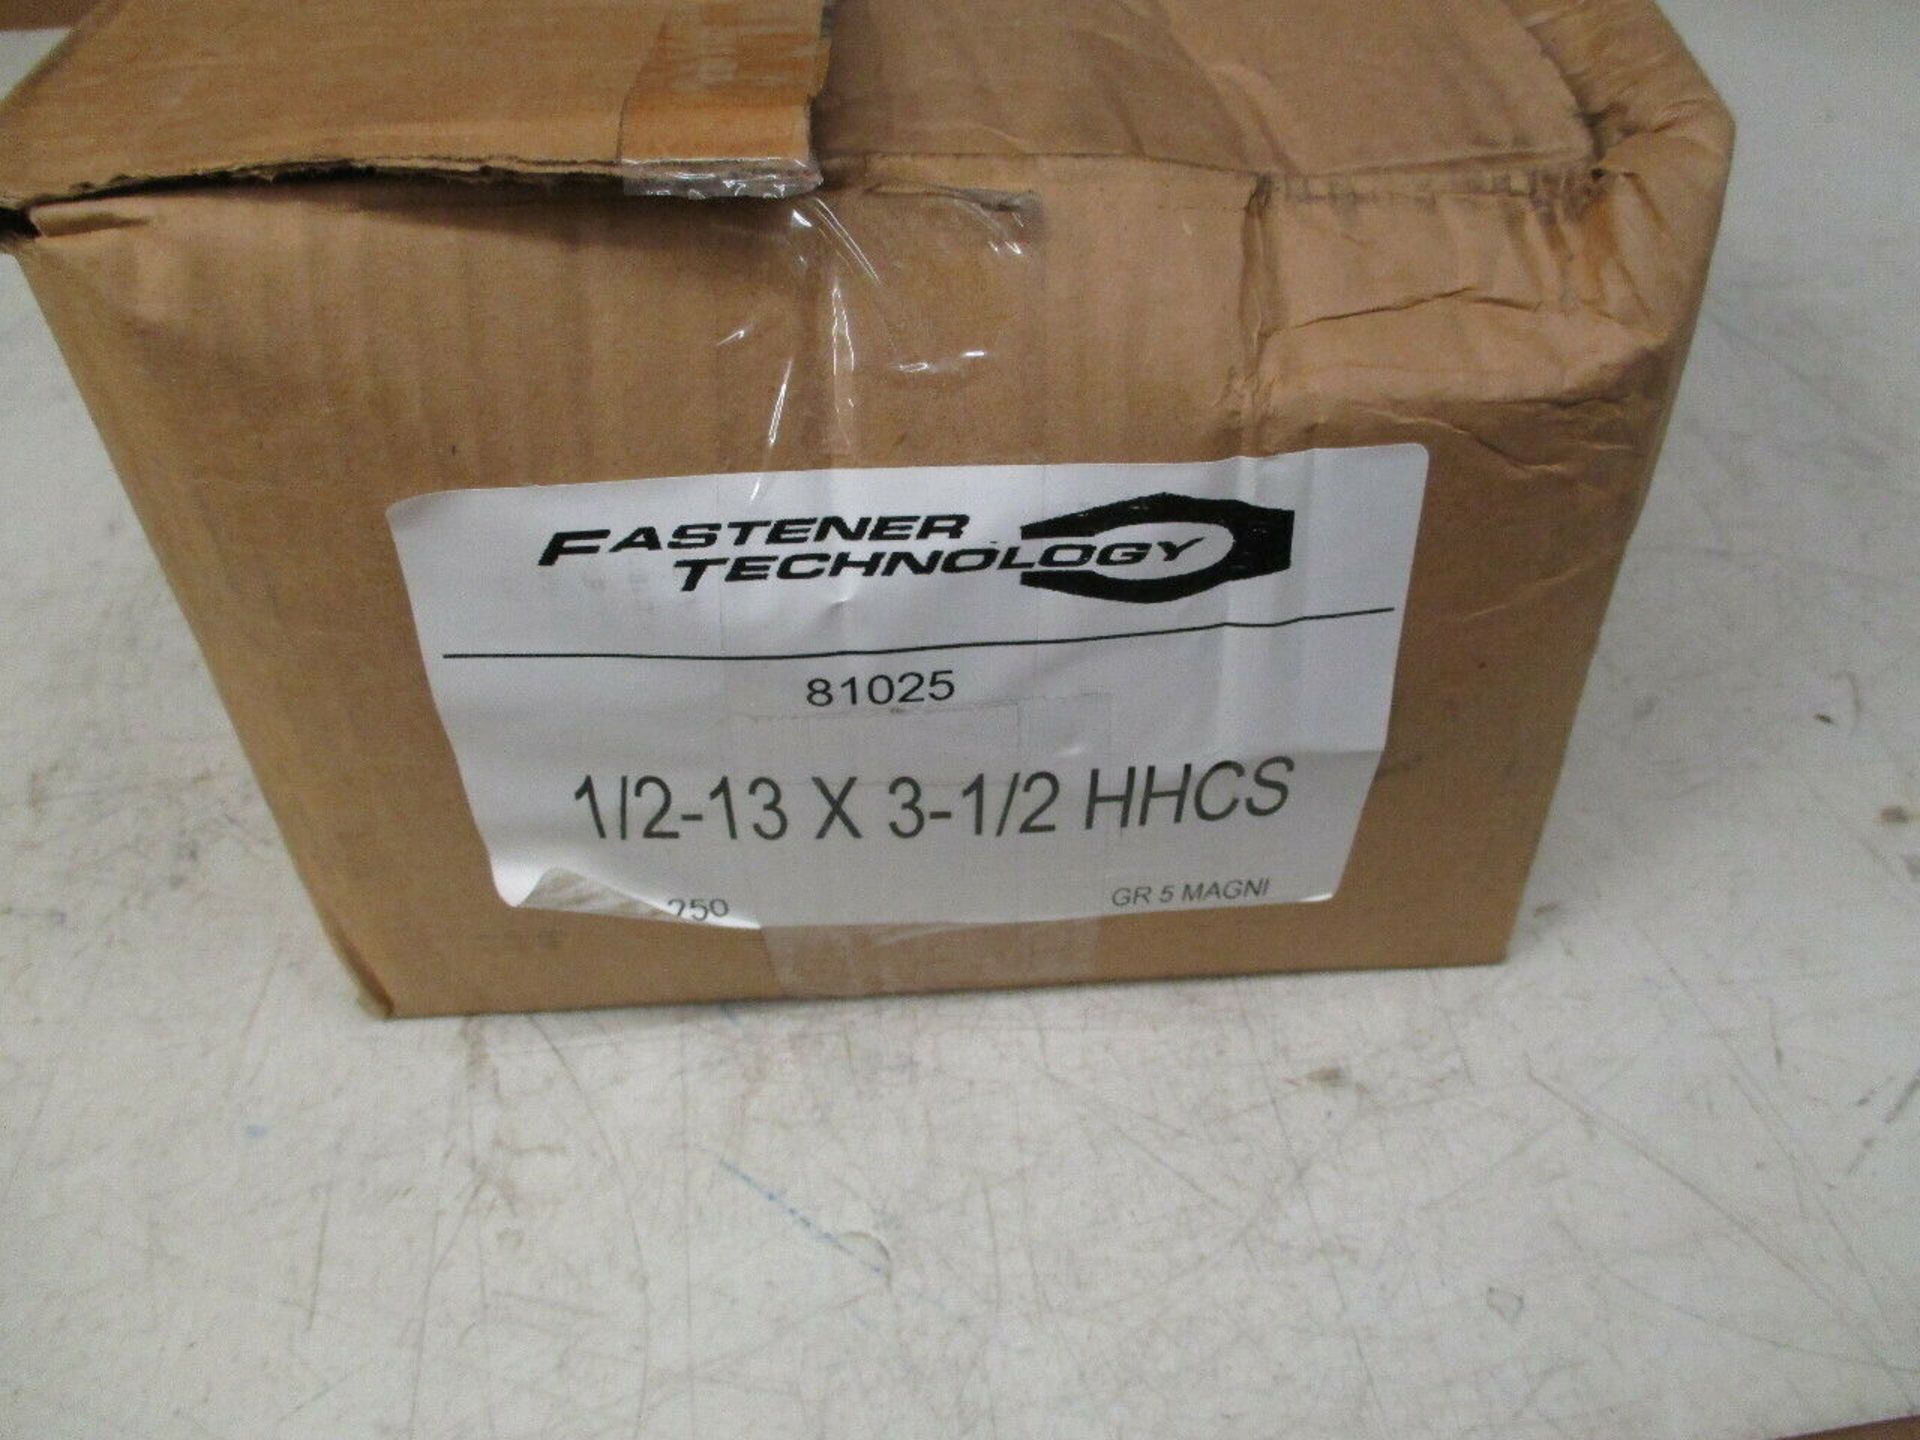 Fastener Technology 1/2-13 X 3-1/2 Grade 5 Corrosion Resistant Hex Head Cap Screw *Box of 250* - Image 2 of 2